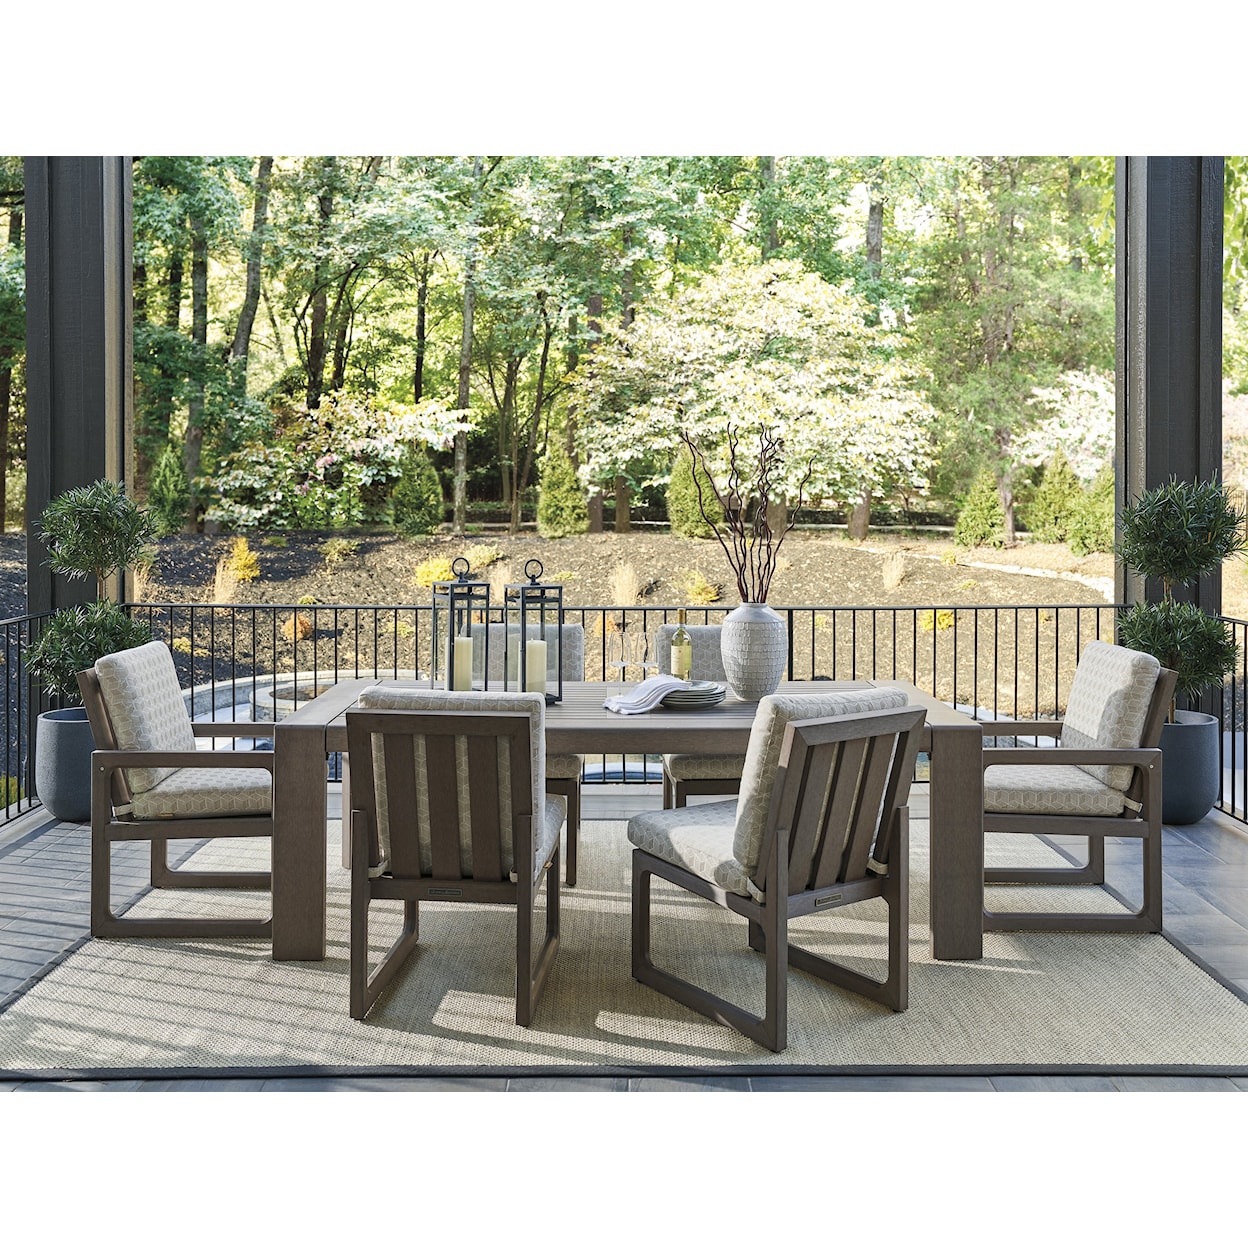 Tommy Bahama Outdoor Living Mozambique 7-Piece Outdoor Dining Set